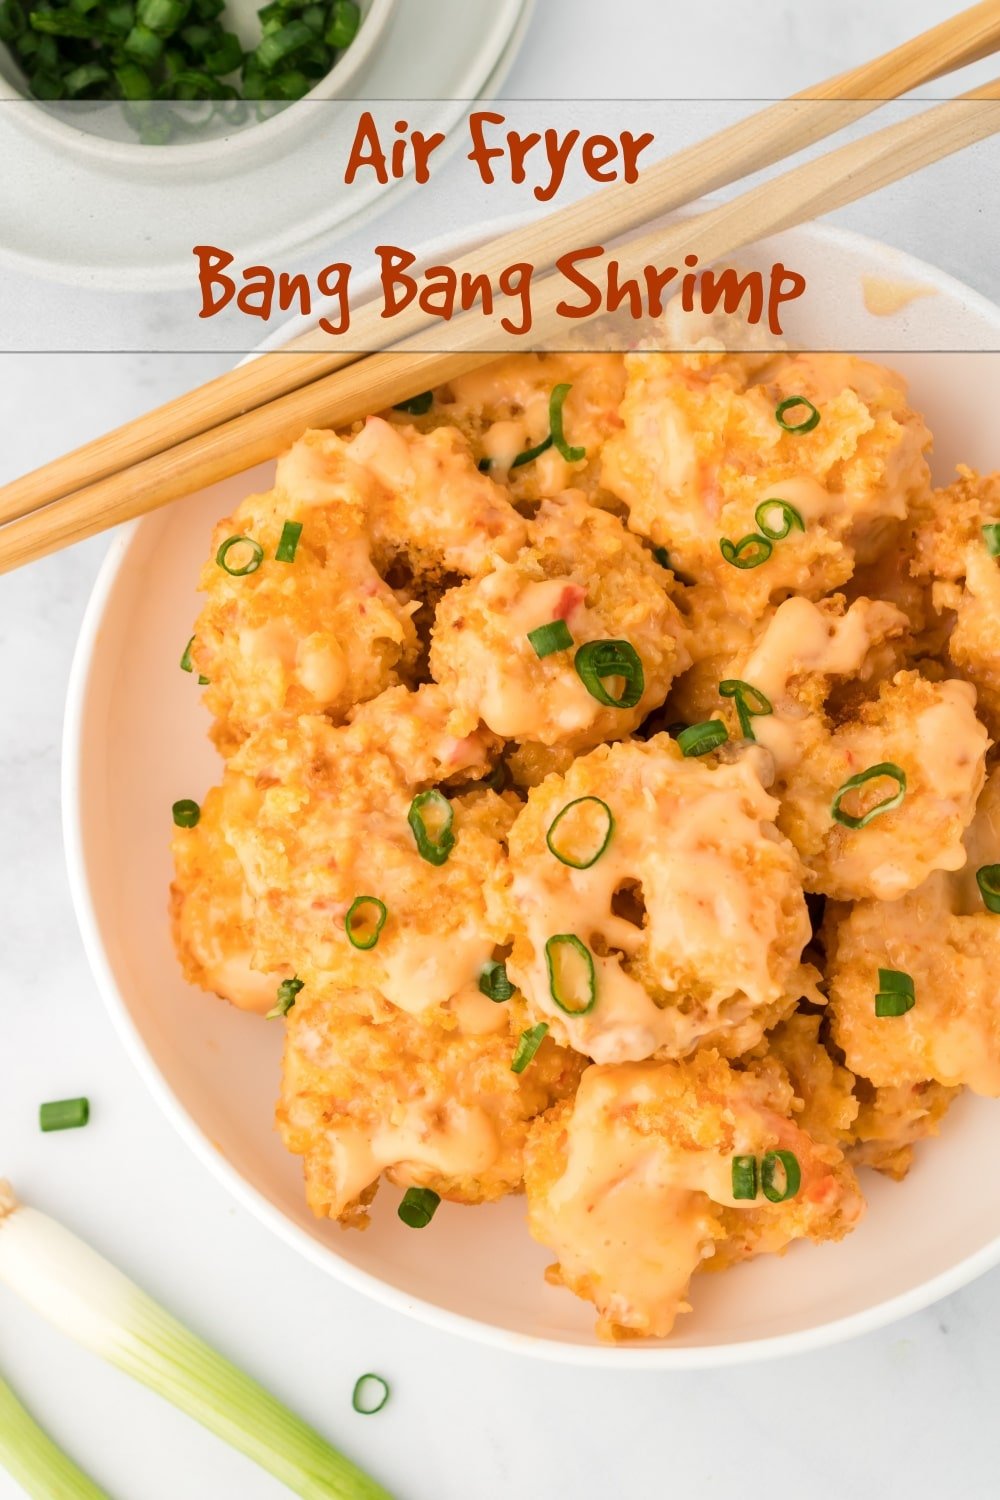 Bang Bang Shrimp made in the air fryer and tossed in its well-loved creamy, sweet and spicy chili sauce is simple enough to make on the busiest of weeknights . This crispy, breaded shrimp will be on your dinner table faster than it takes to order take out. via @cmpollak1